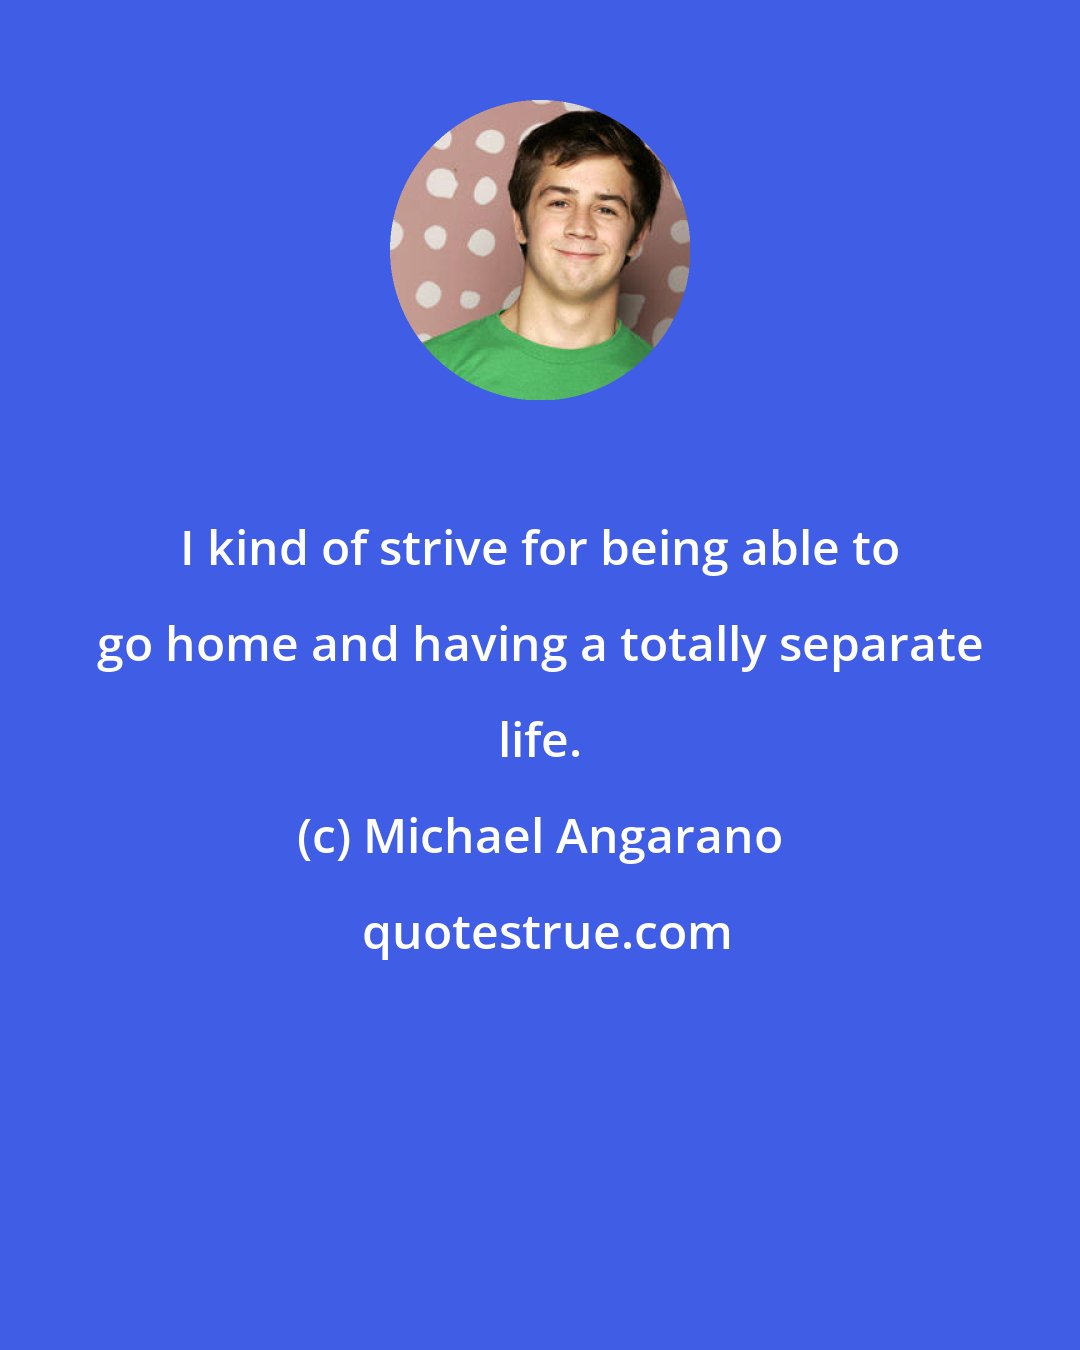 Michael Angarano: I kind of strive for being able to go home and having a totally separate life.